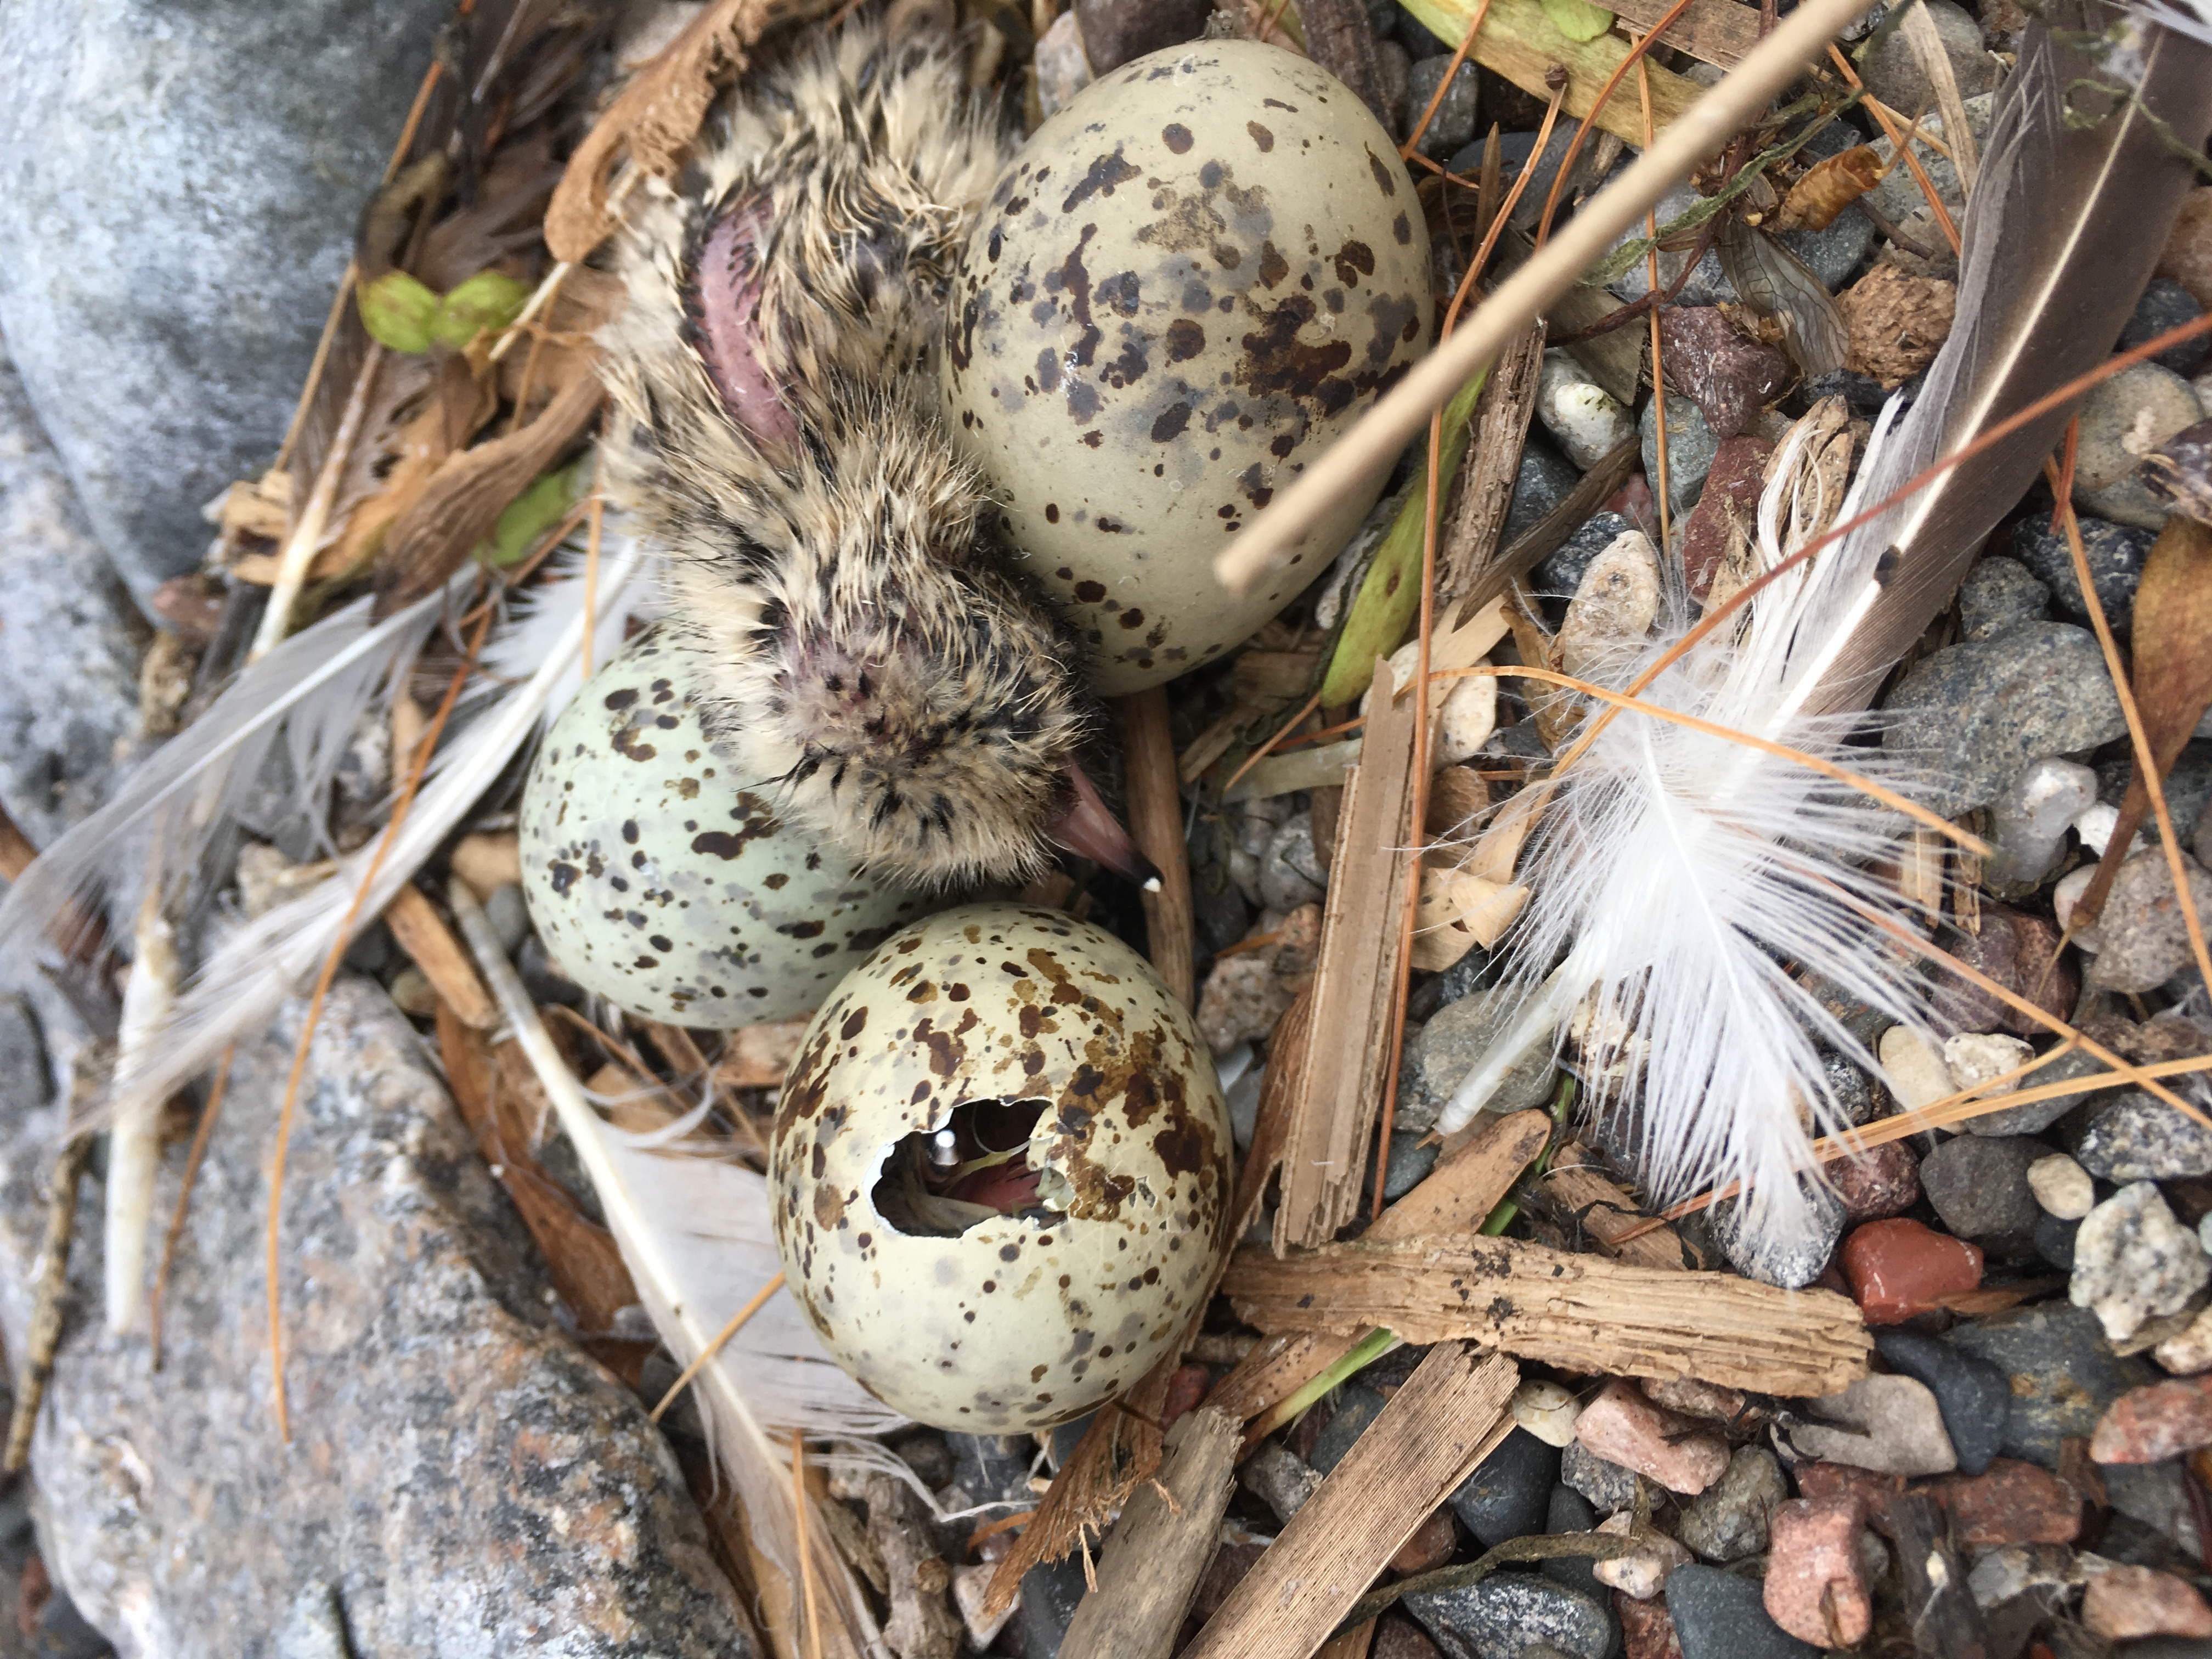 Close up view of three common tern eggs and a nestling. The eggs are slightly oblong, tan and have irregular dark brown dots. One eggs has a hole in it that the soon to be nestling has pecked and a recently emerged nestling is laying over the other two eggs.